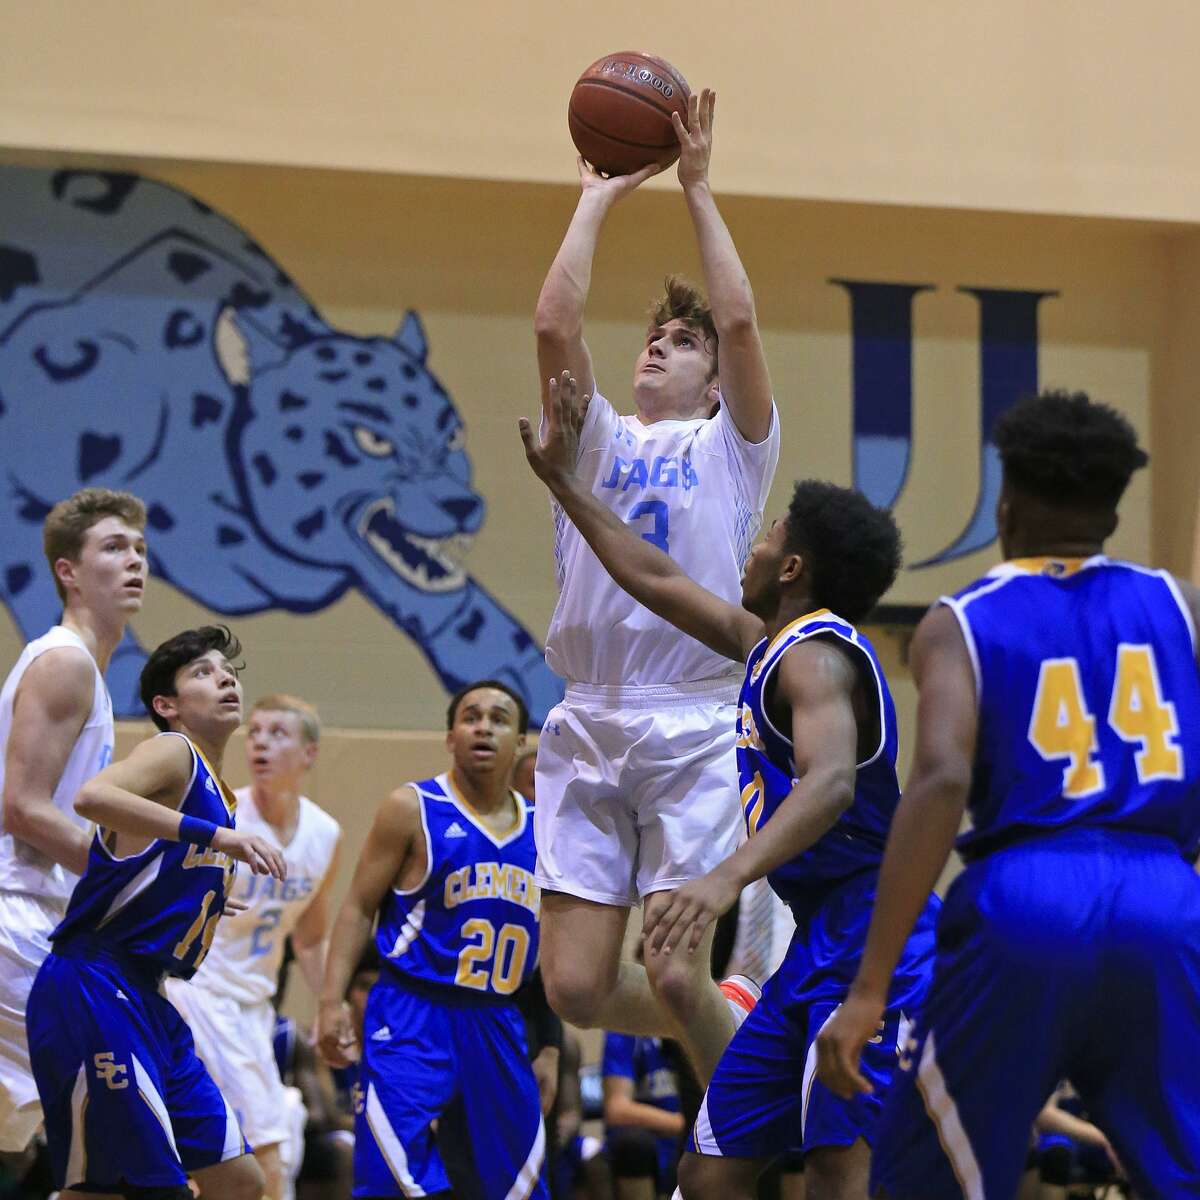 Johnson's Zach Keller (center) scored 20 points each in wins vs. Roosevelt and Churchill to help the Jaguars win the District 27-6A championship.